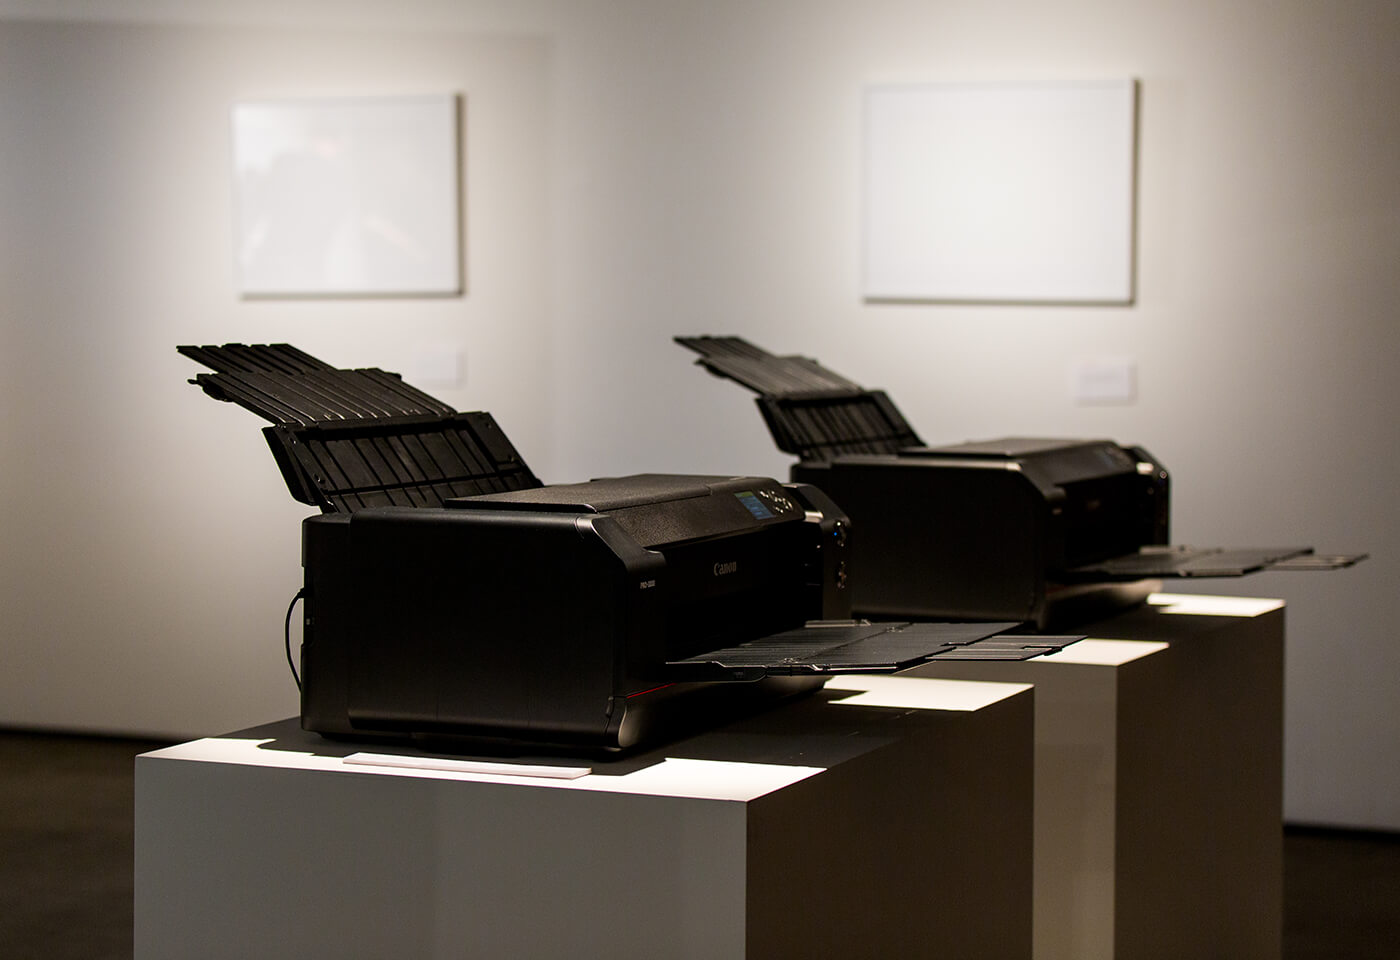 Image of two printers on display stands